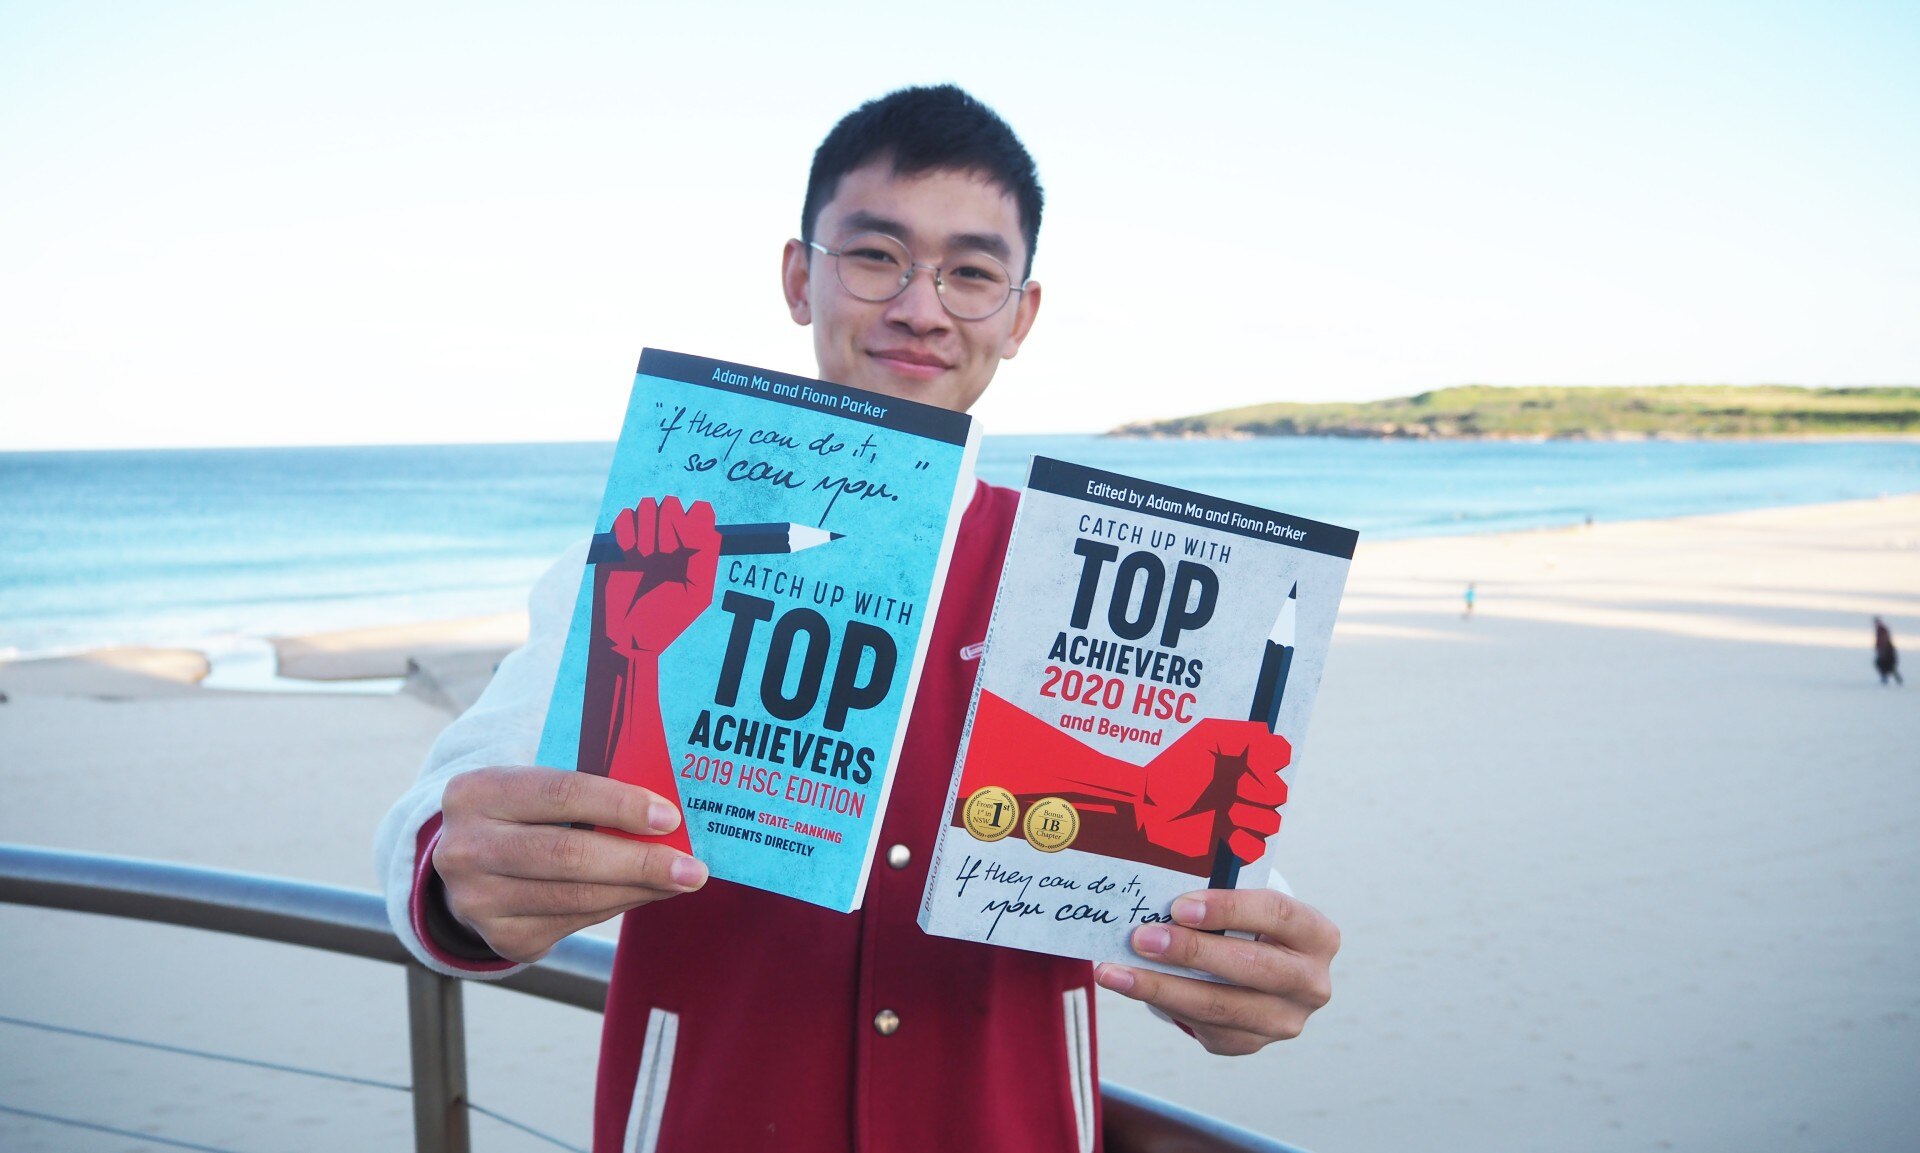 Adam Ma with his books “Catch Up with Top Achievers”.